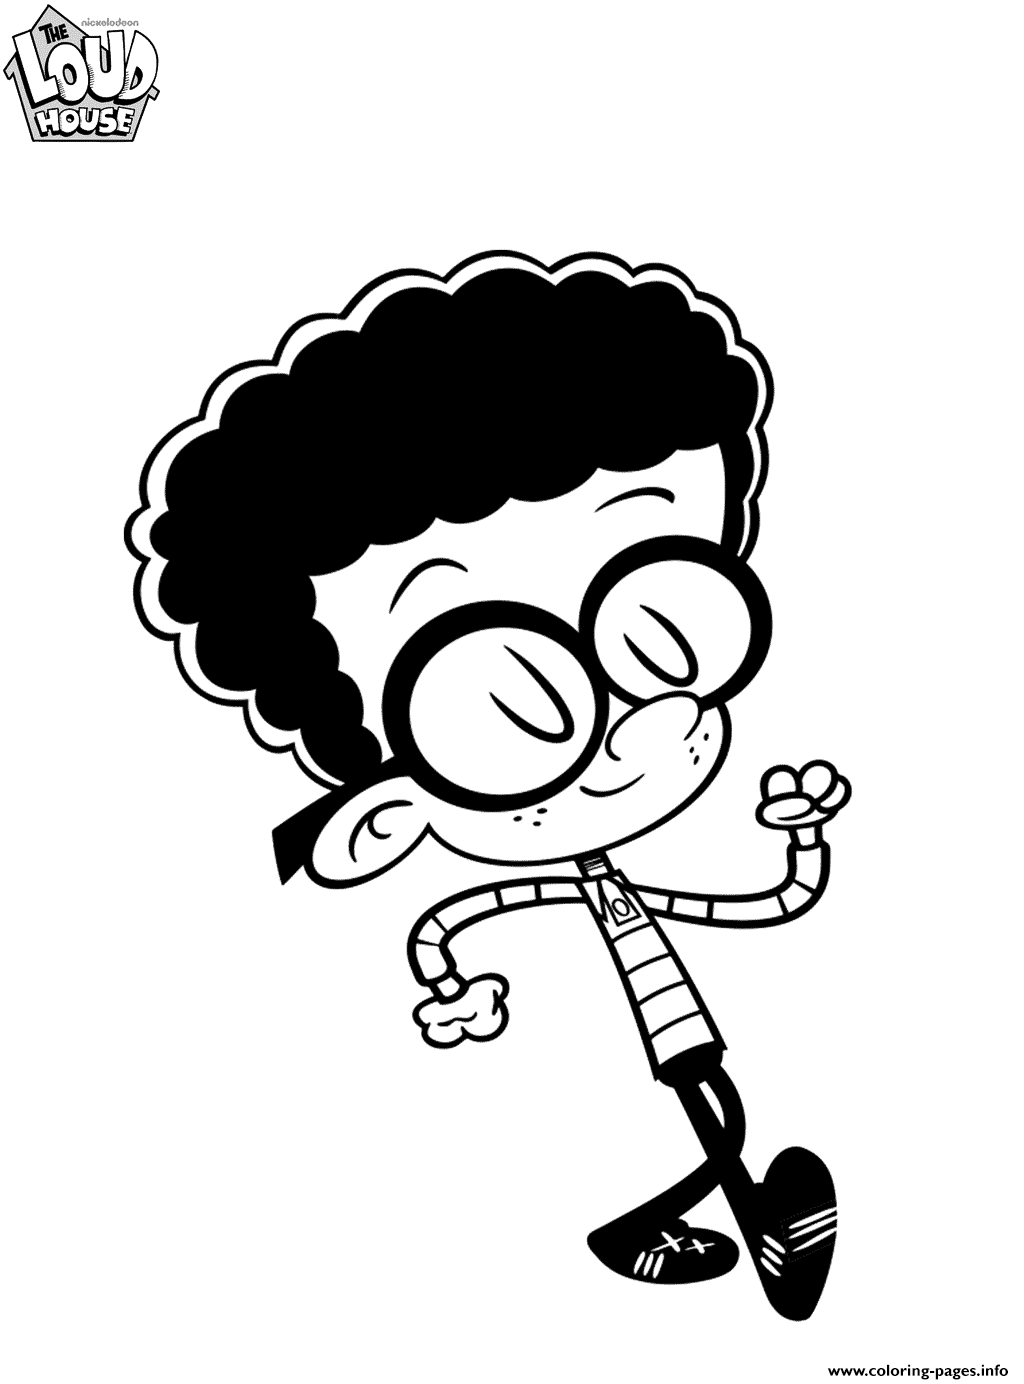 Clyde Loud House Coloring page Printable